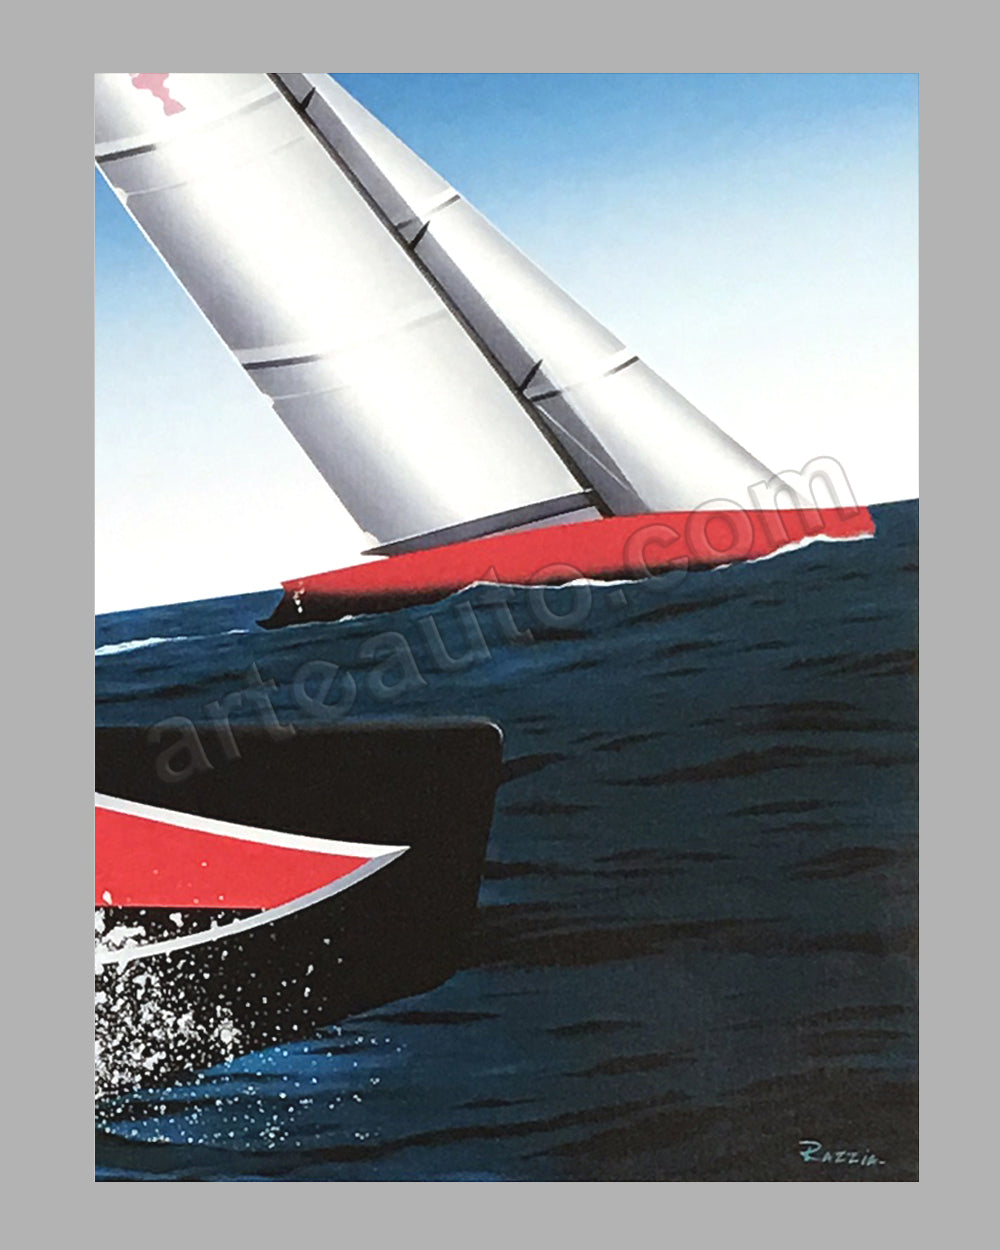 Sold at Auction: VINTAGE ADVERTISING POSTER BY RAZZIA 1986 - LOUIS VUITTON  CUP 1987